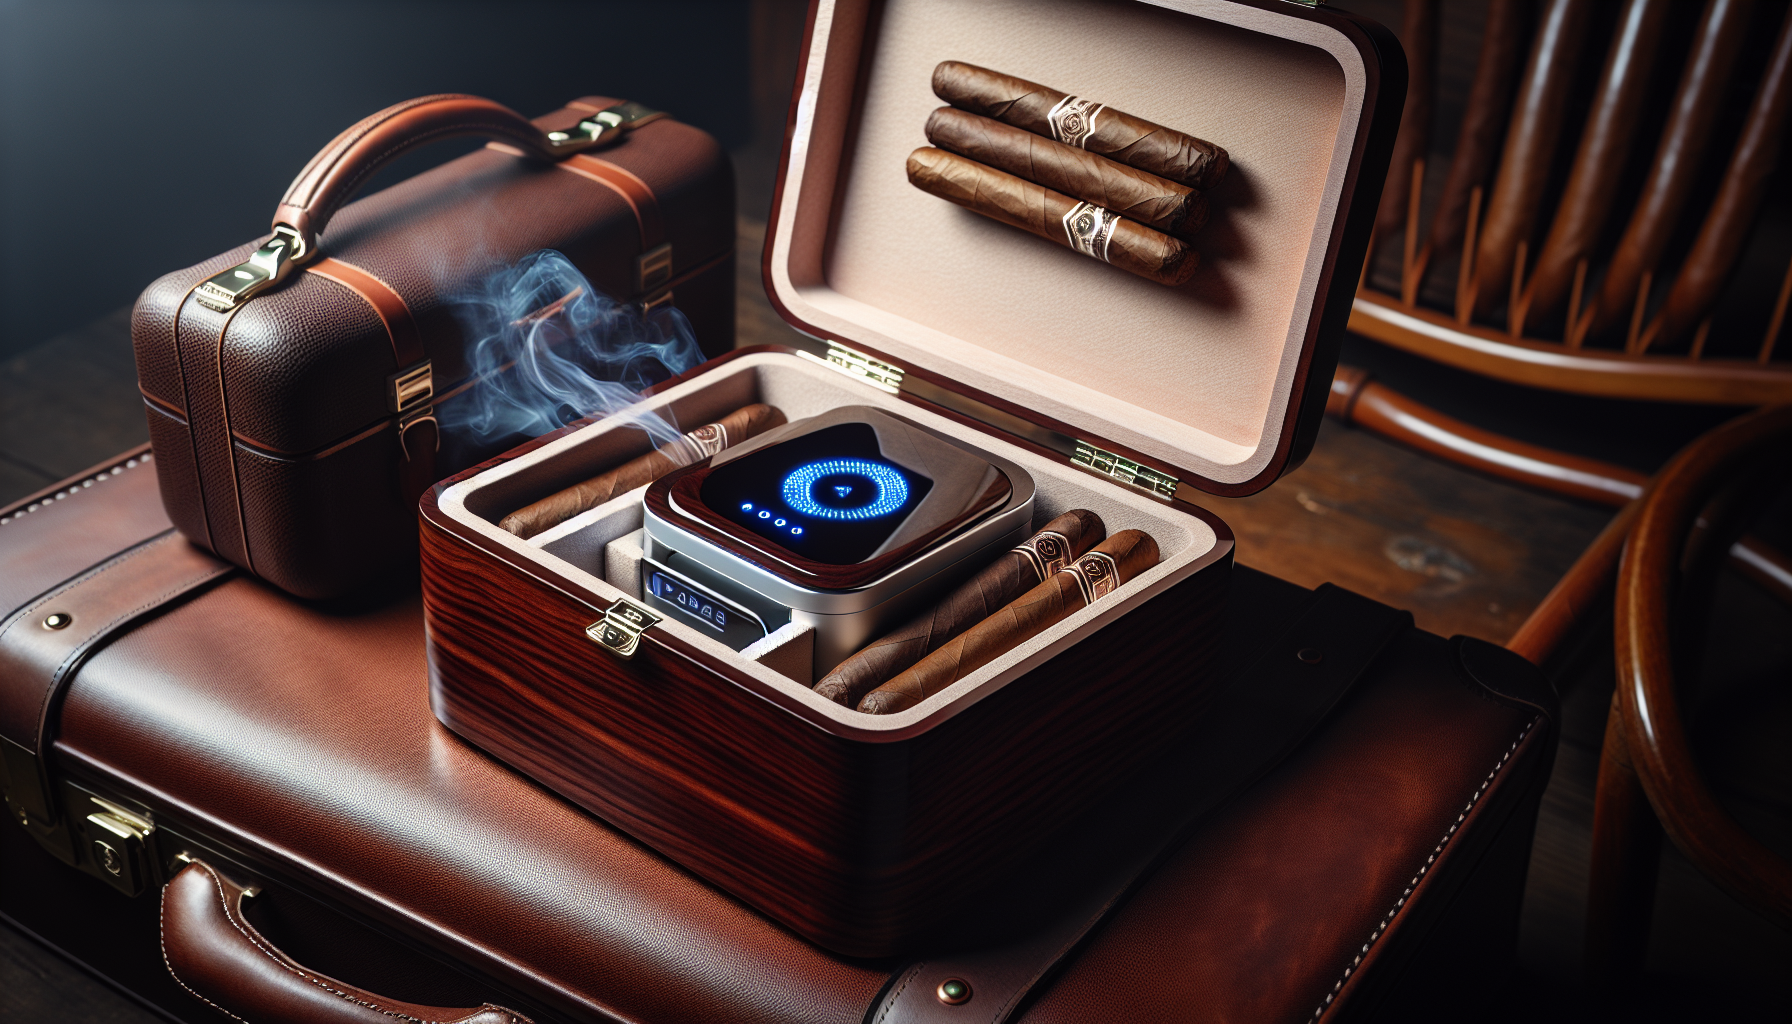 Portable humidification system in a travel humidor